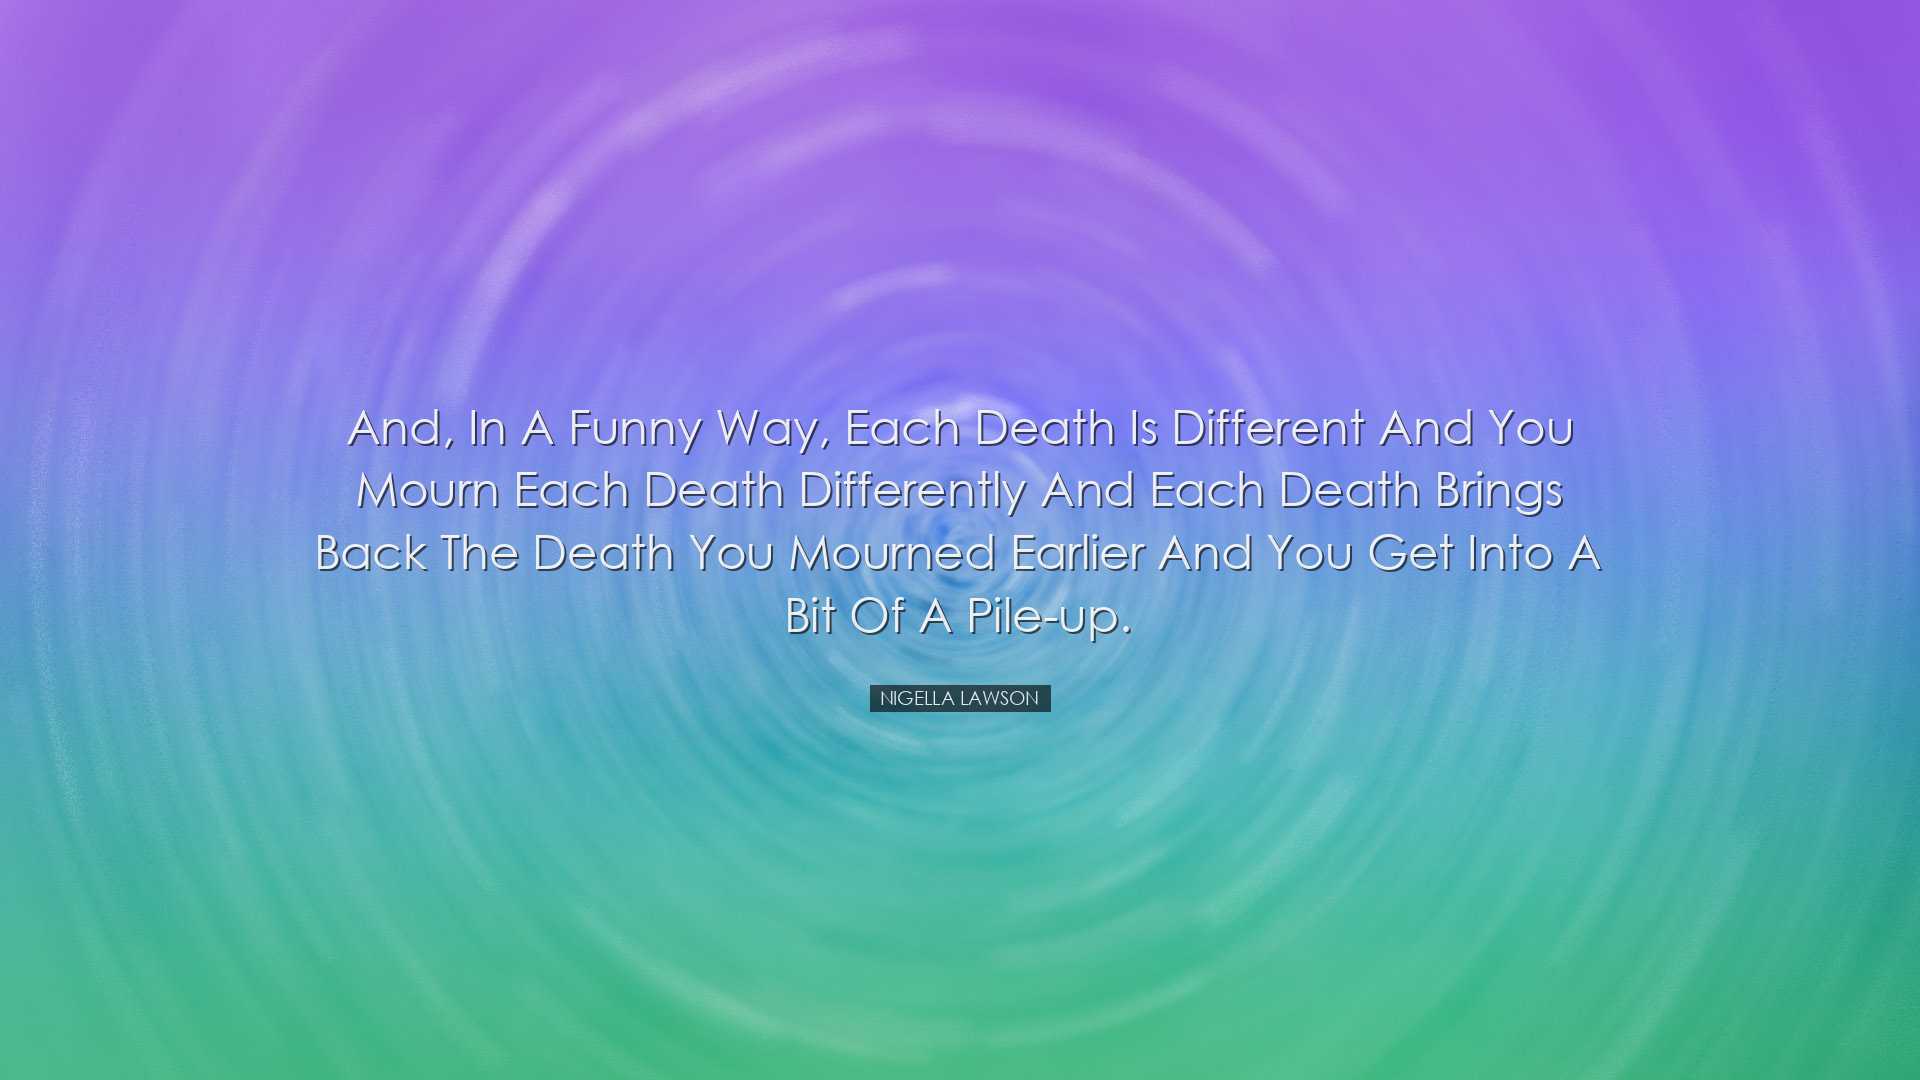 And, in a funny way, each death is different and you mourn each de